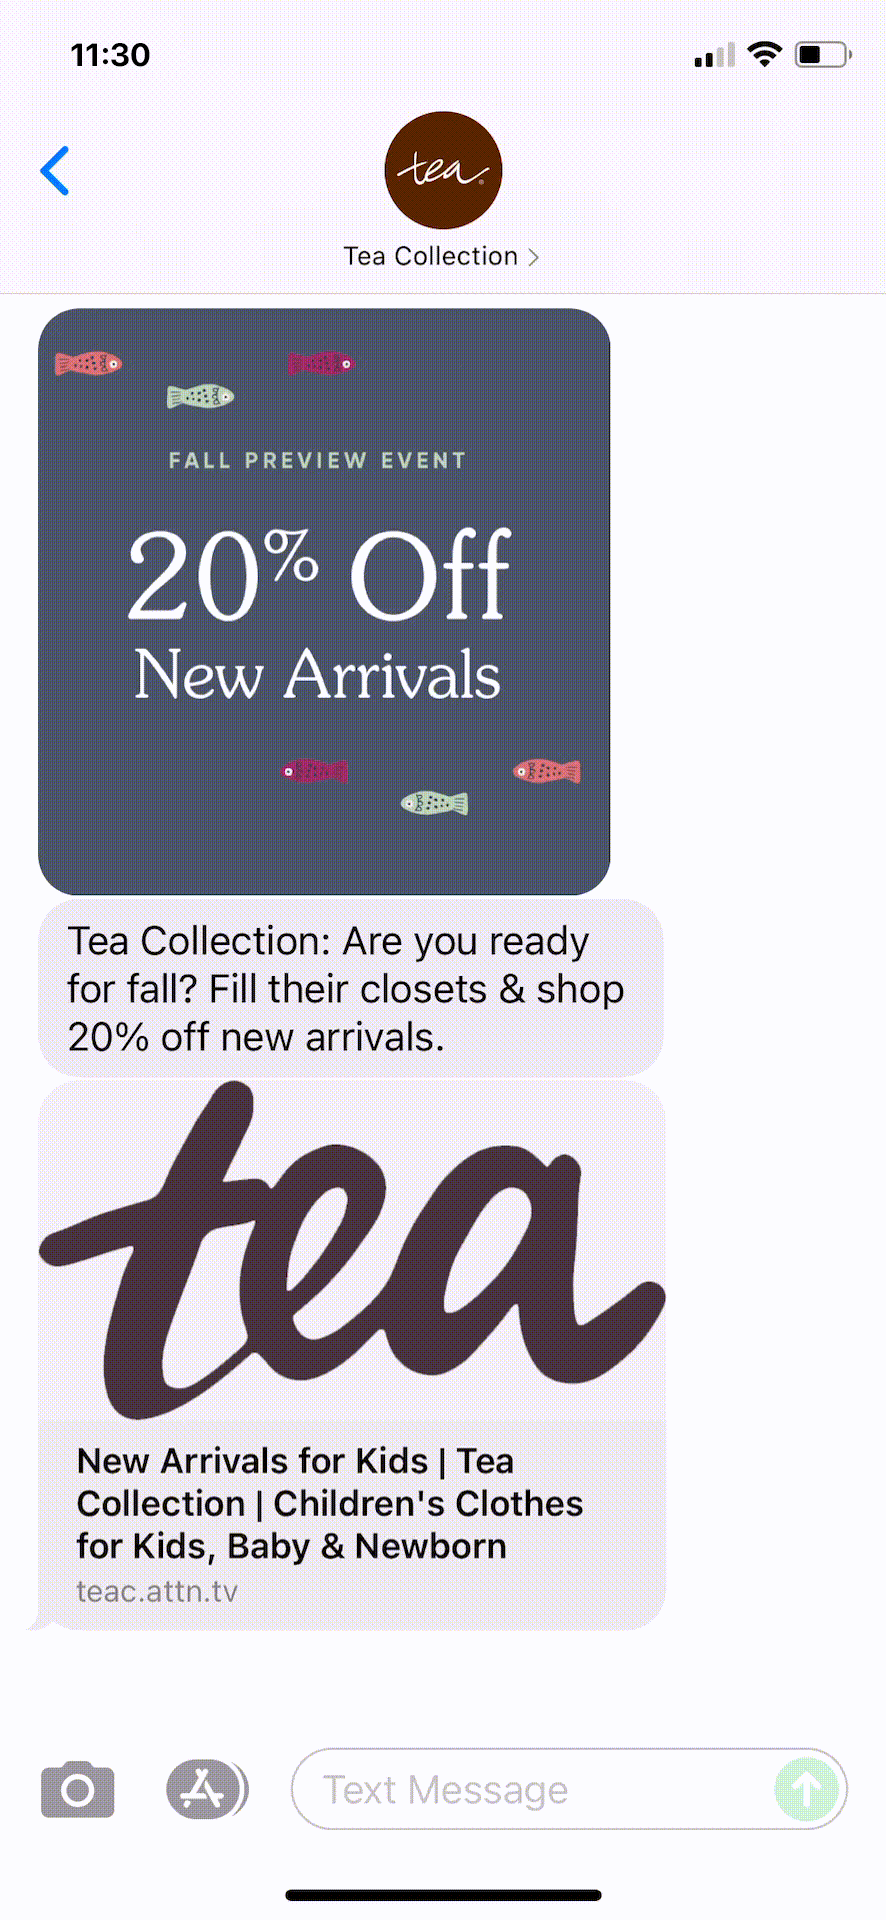 Tea-Collection-Text-Message-Marketing-Example-07.13.2021